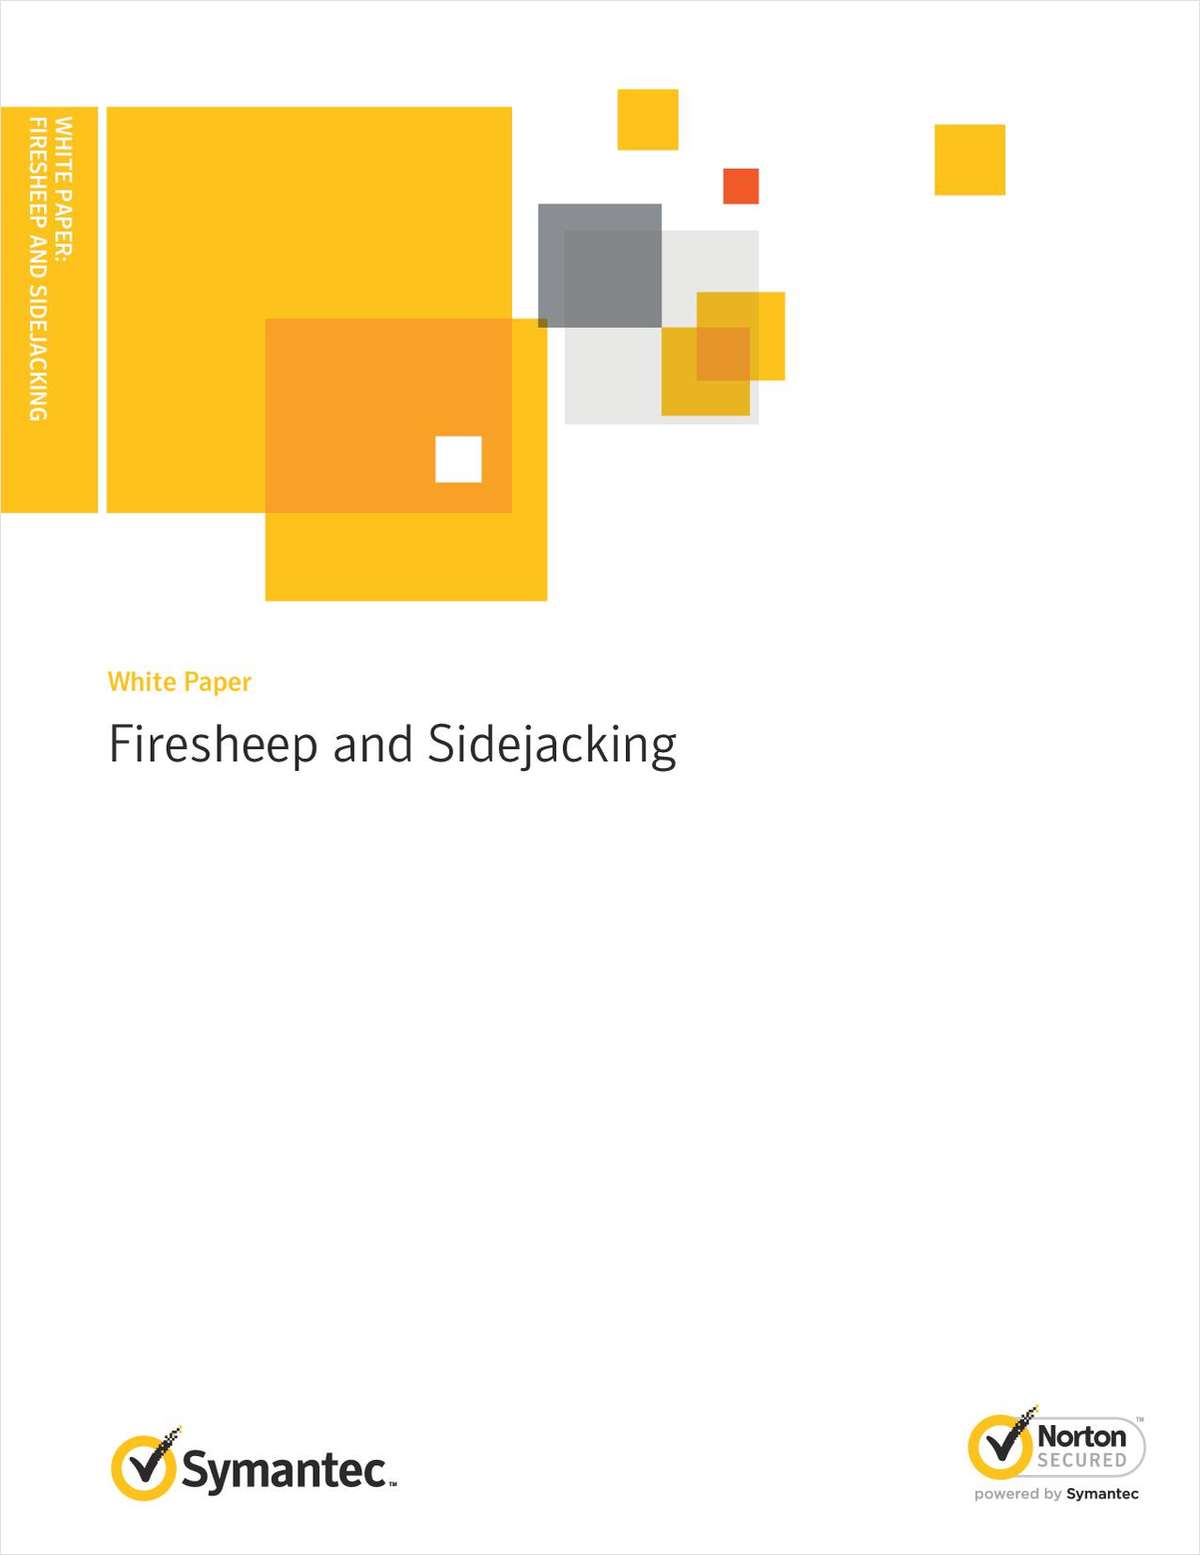 Protecting Users From Firesheep and Sidejacking Attacks with SSL